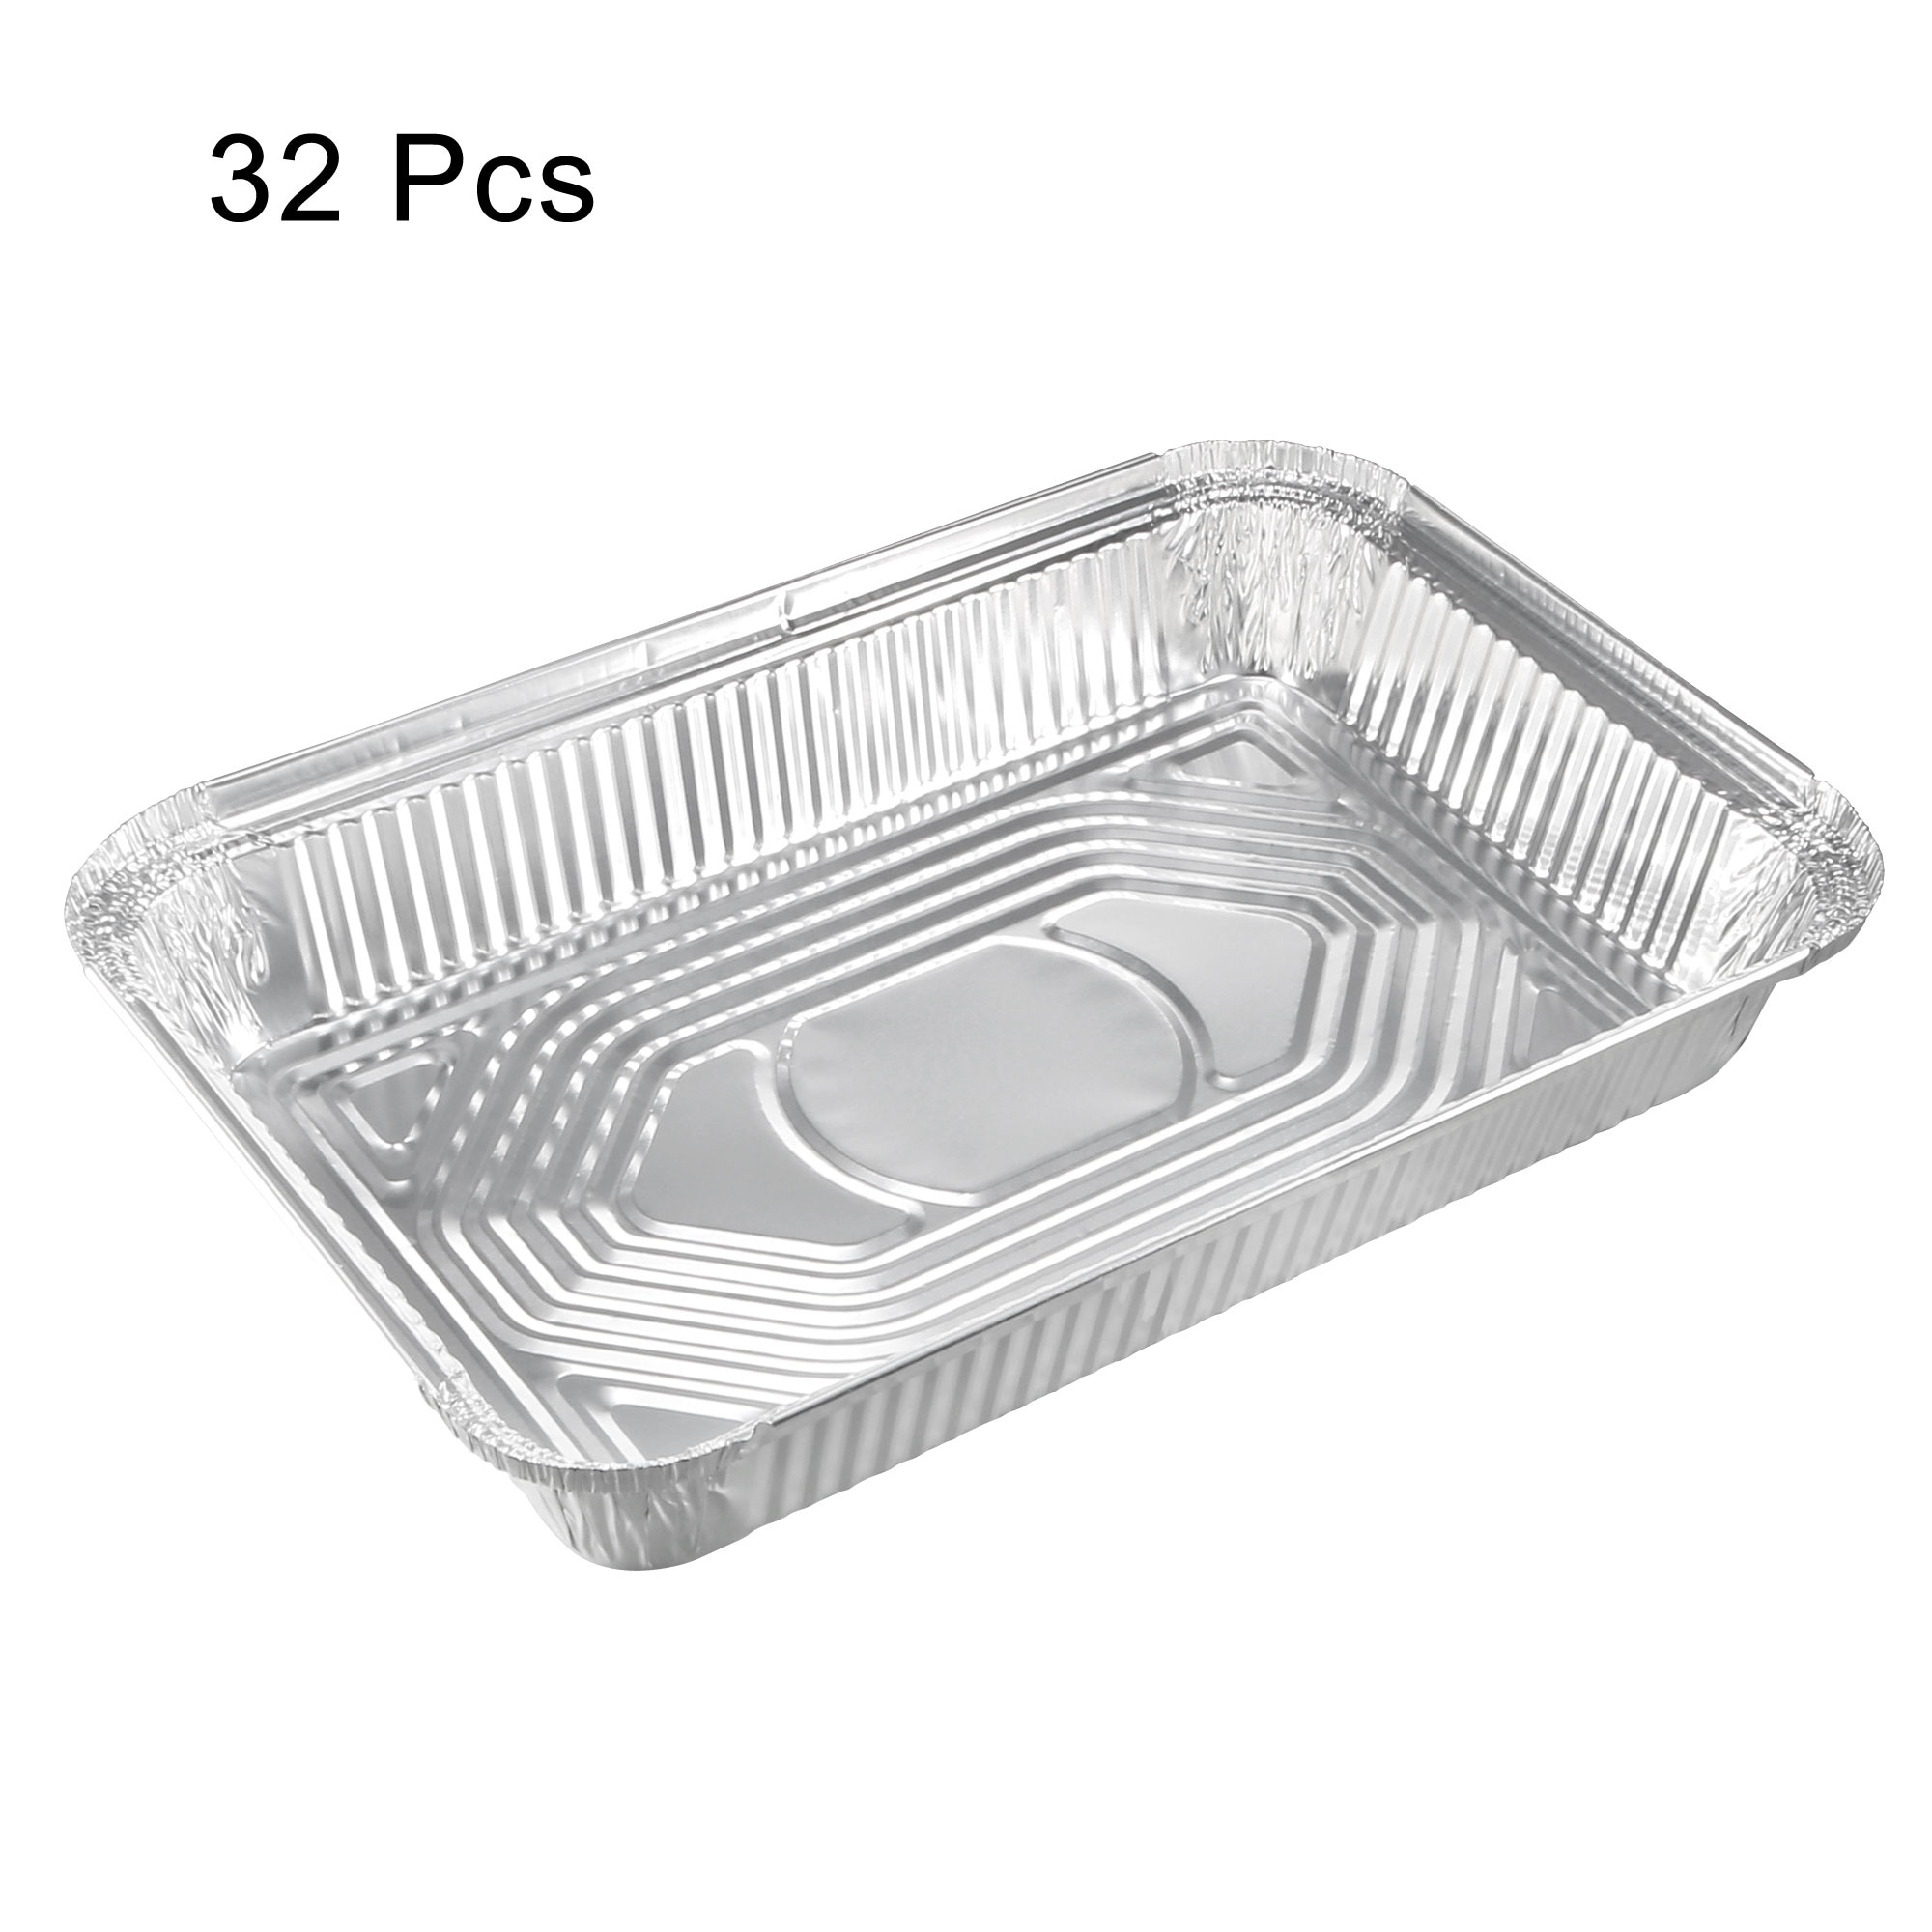 https://ak1.ostkcdn.com/images/products/is/images/direct/4b3ca6dacd63673f869d79244d82dc8e8fd09c70/Aluminum-Foil-Pan%2C-Disposable-Trays-Containers-for-Kitchen-Roasting-Co.jpg